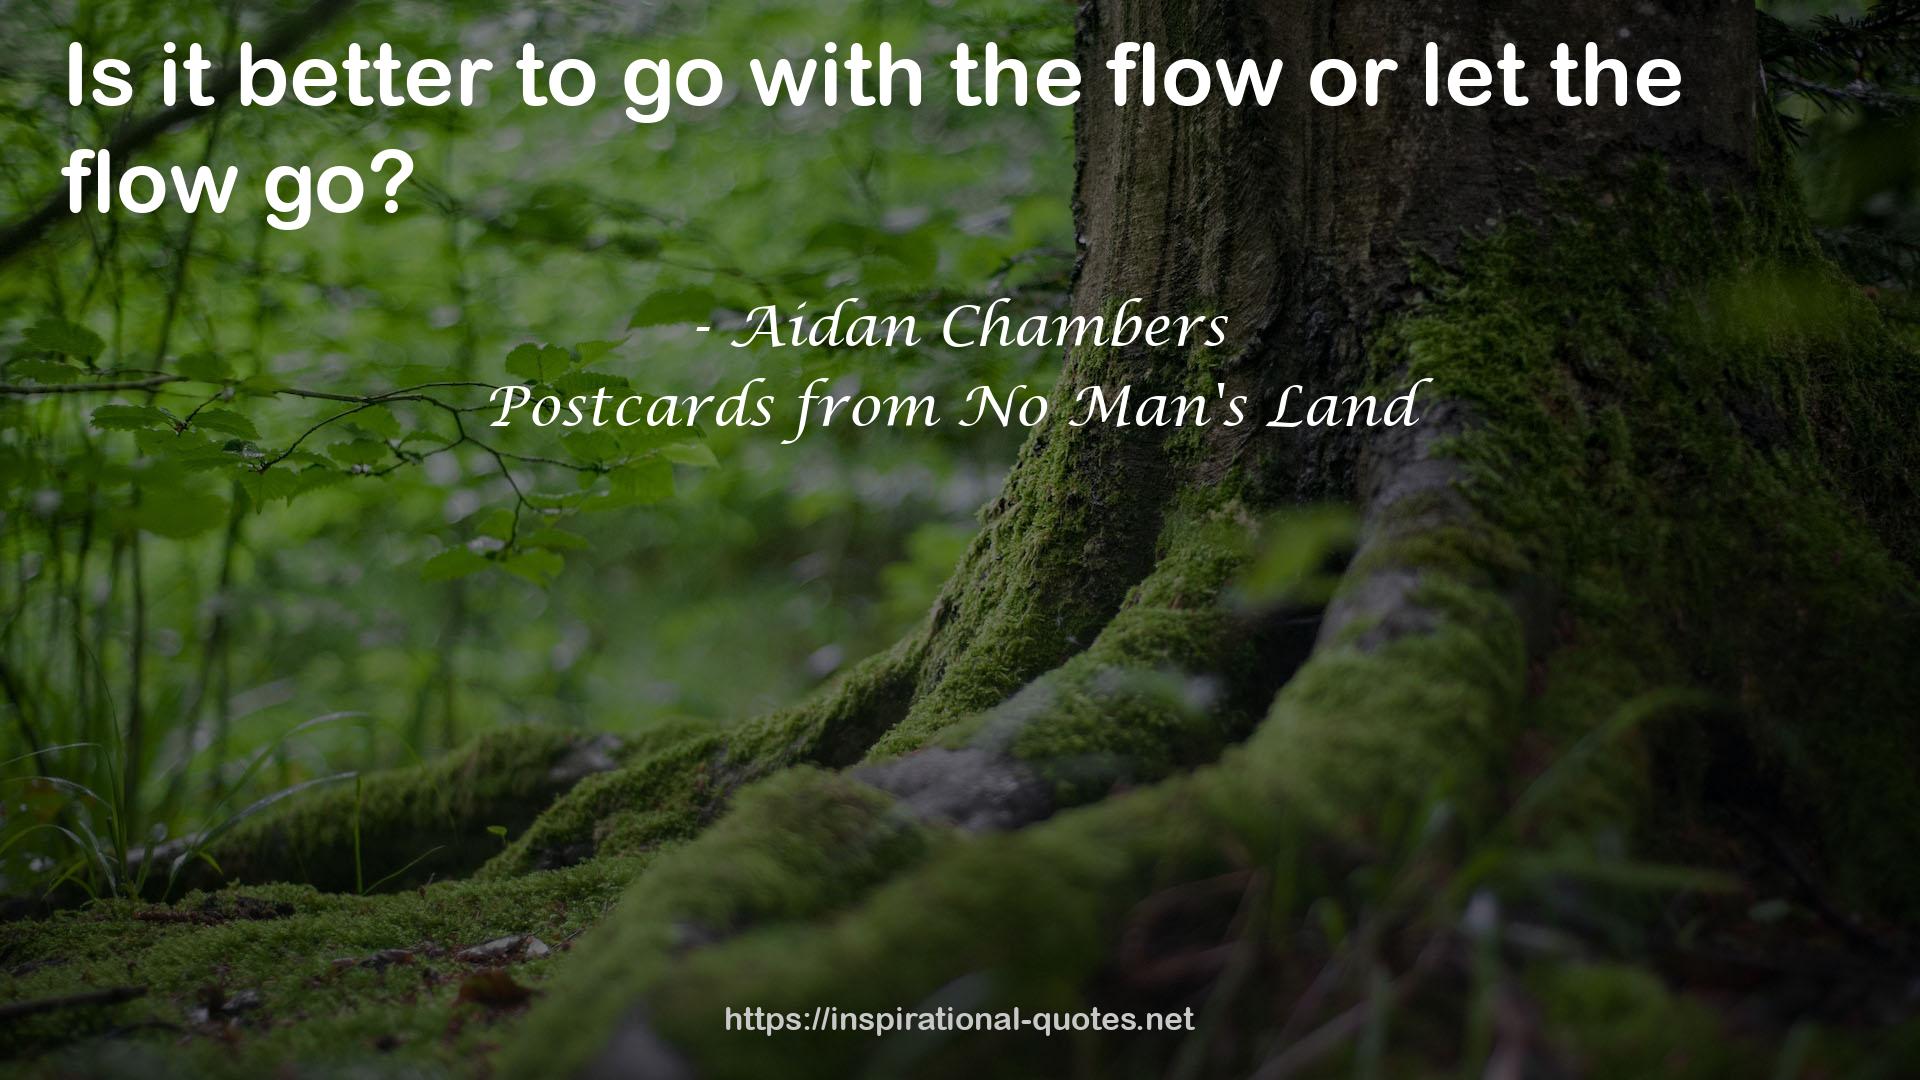 Postcards from No Man's Land QUOTES